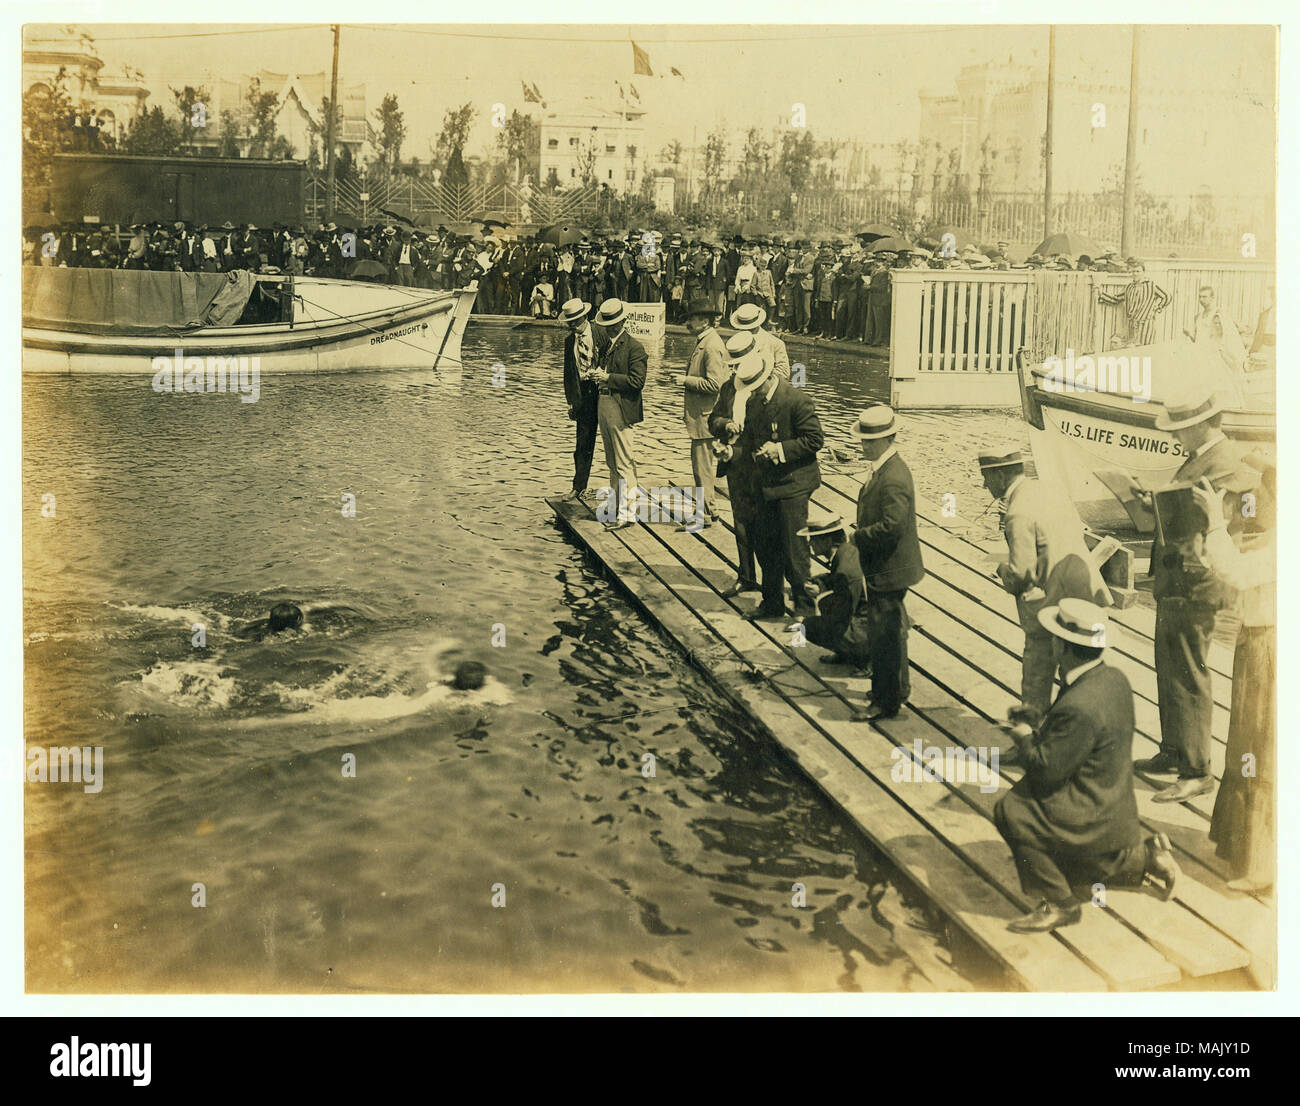 Horizontal photograph of the finish of the 220 yard swimming competition in the 1904 Olympic Games. 'Daniels, New York Athletic Club, winning'. Title: 1904 Olympics: Finish of 220 yard swim competition.  . 1904. Stock Photo